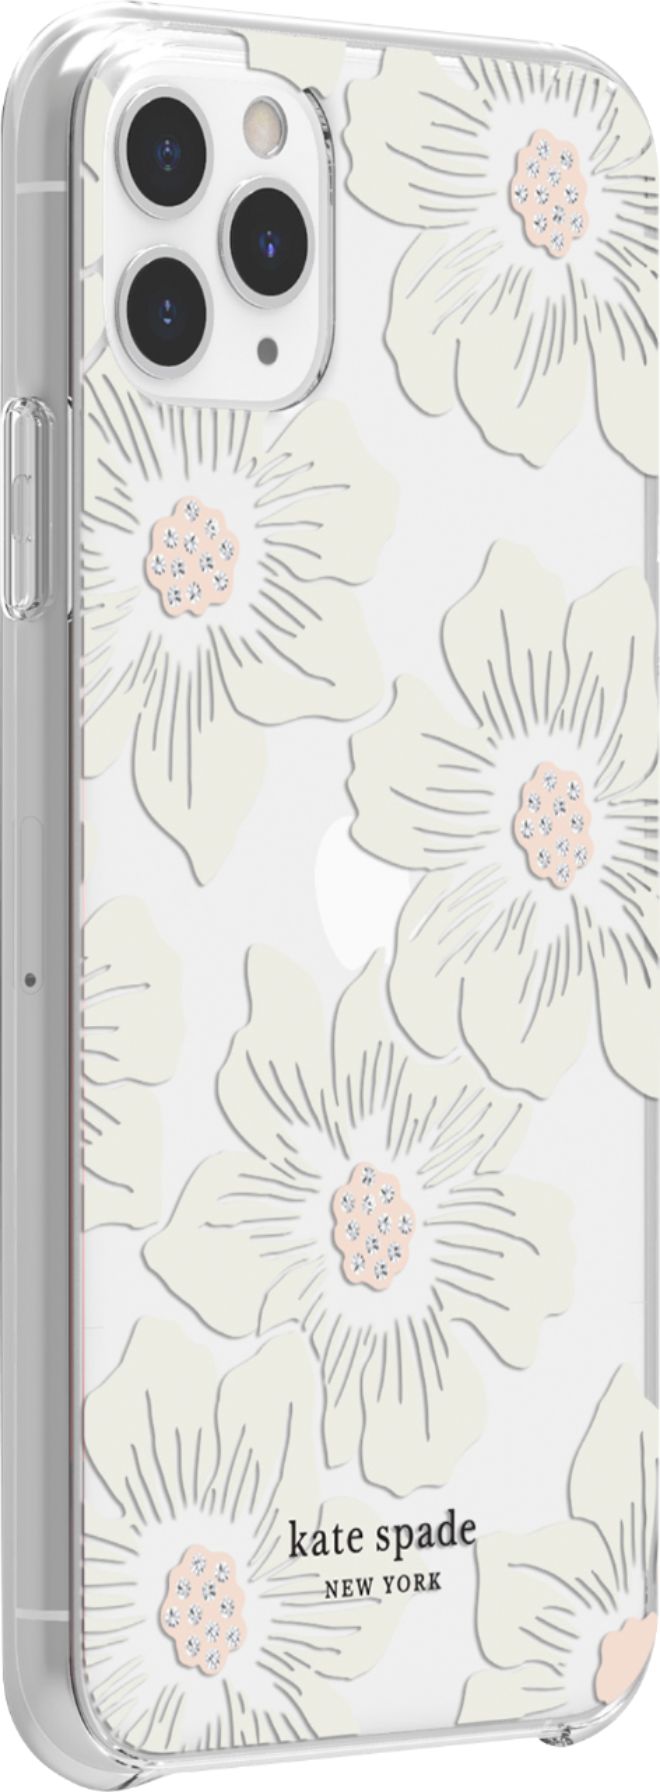 Angle View: kate spade new york - Protective Hard Shell Case for Apple® iPhone® 11 Pro Max - Cream With Stones/Hollyhock Floral Clear